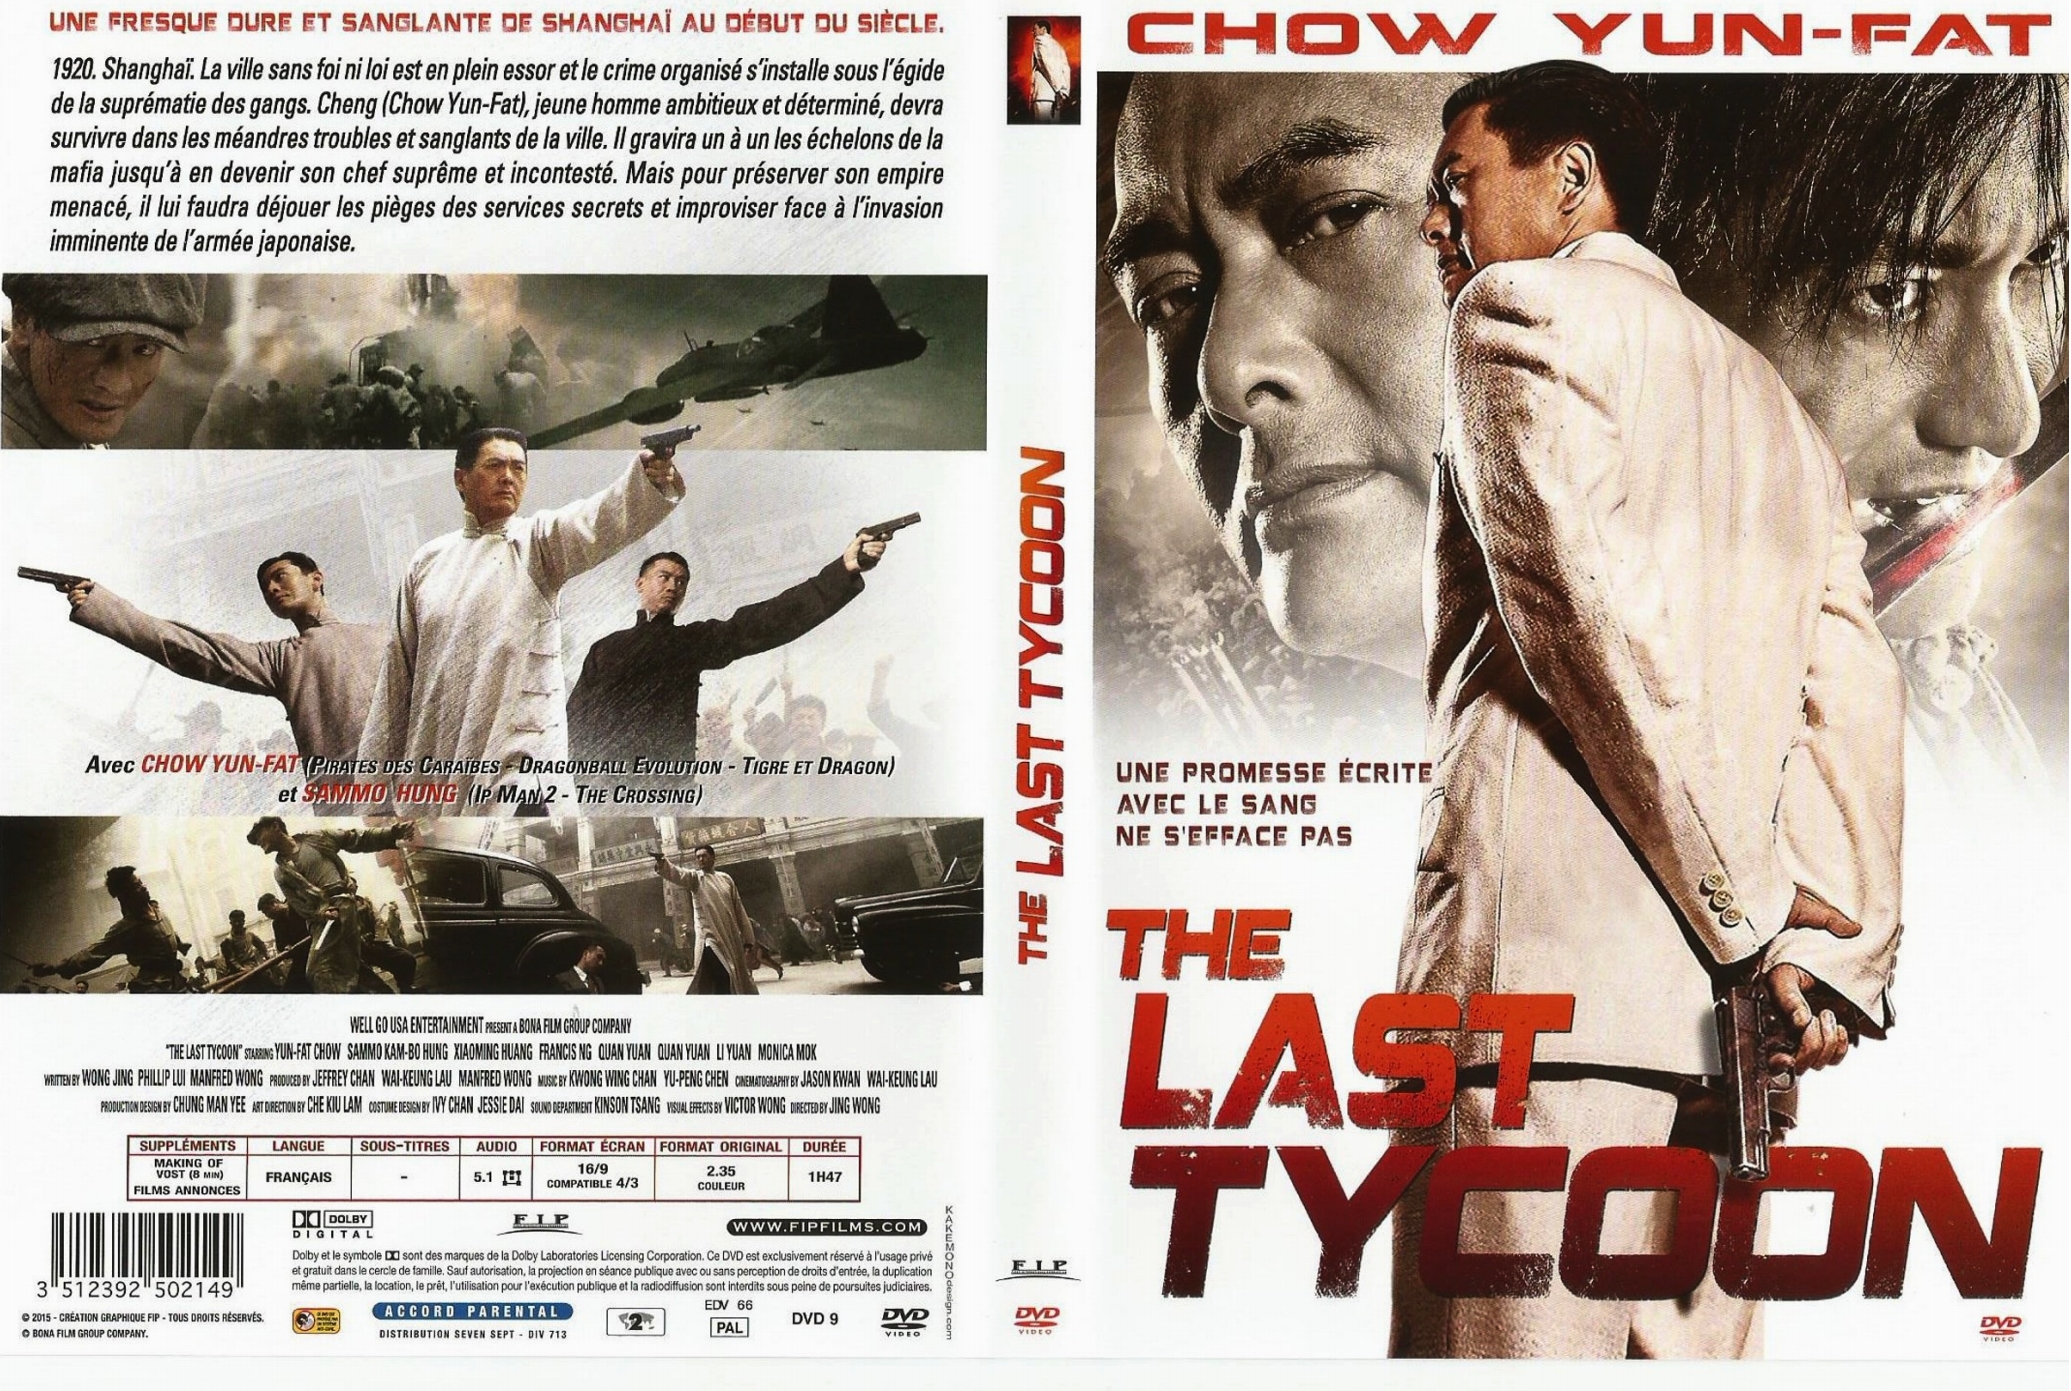 Jaquette DVD The Last Tycoon